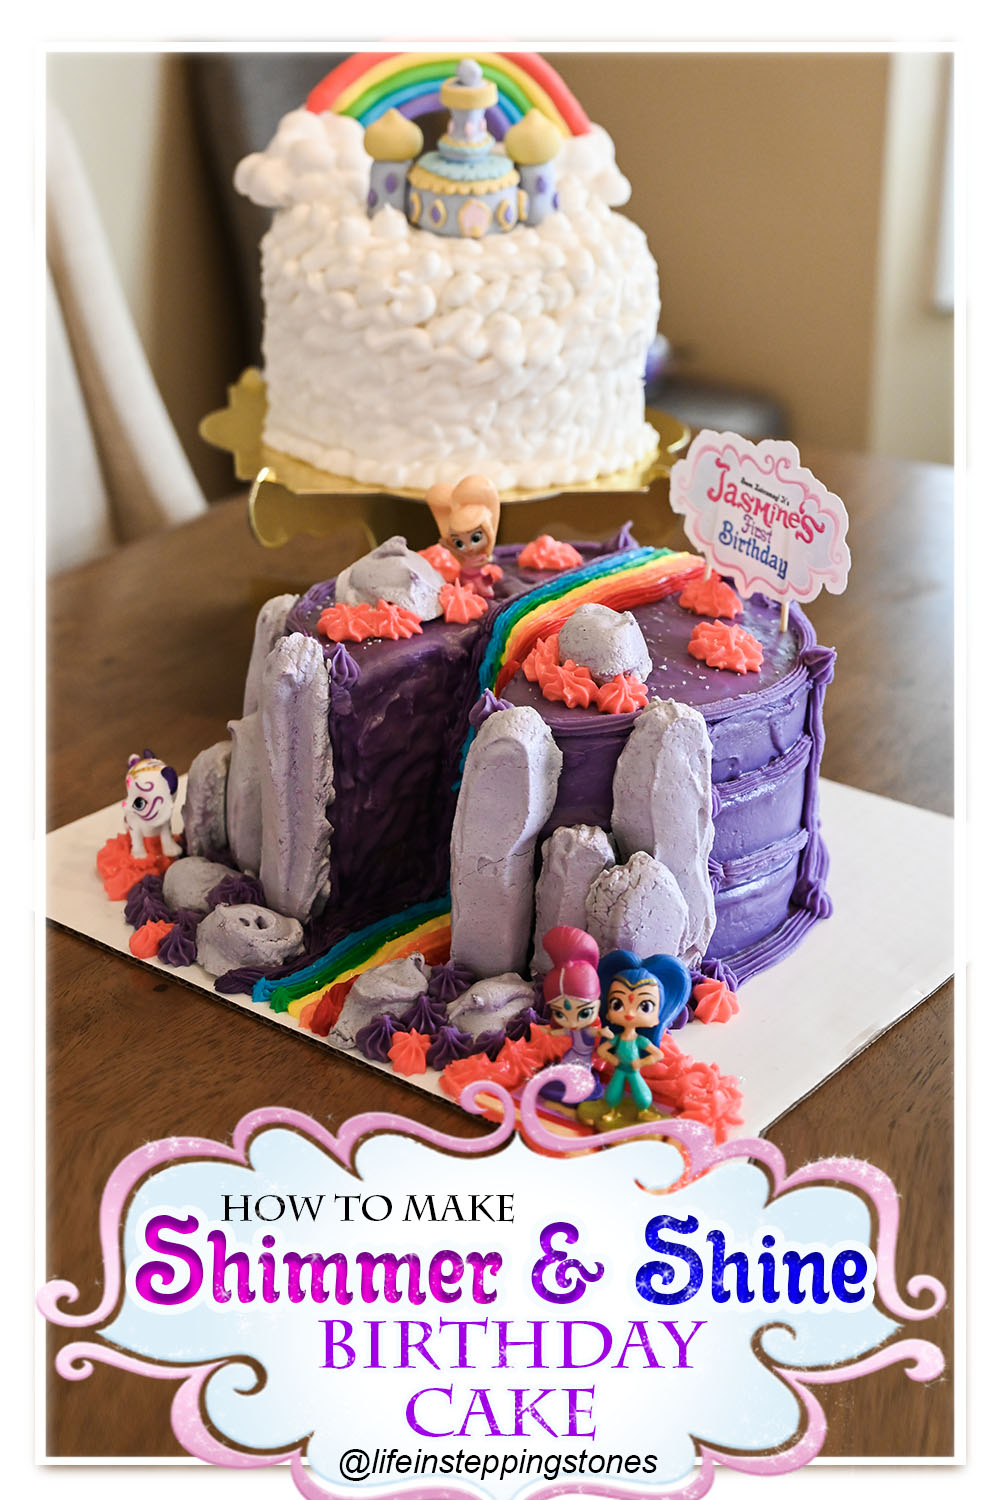 How to Make a Shimmer and Shine Birthday Cake for your child's Shimmer and Shine theme birthday party. Design a cloud smash cake and Rainbow Zahramay Falls cake. Plus Gluten free and dairy free cake recipe and dairy free frosting recipe.